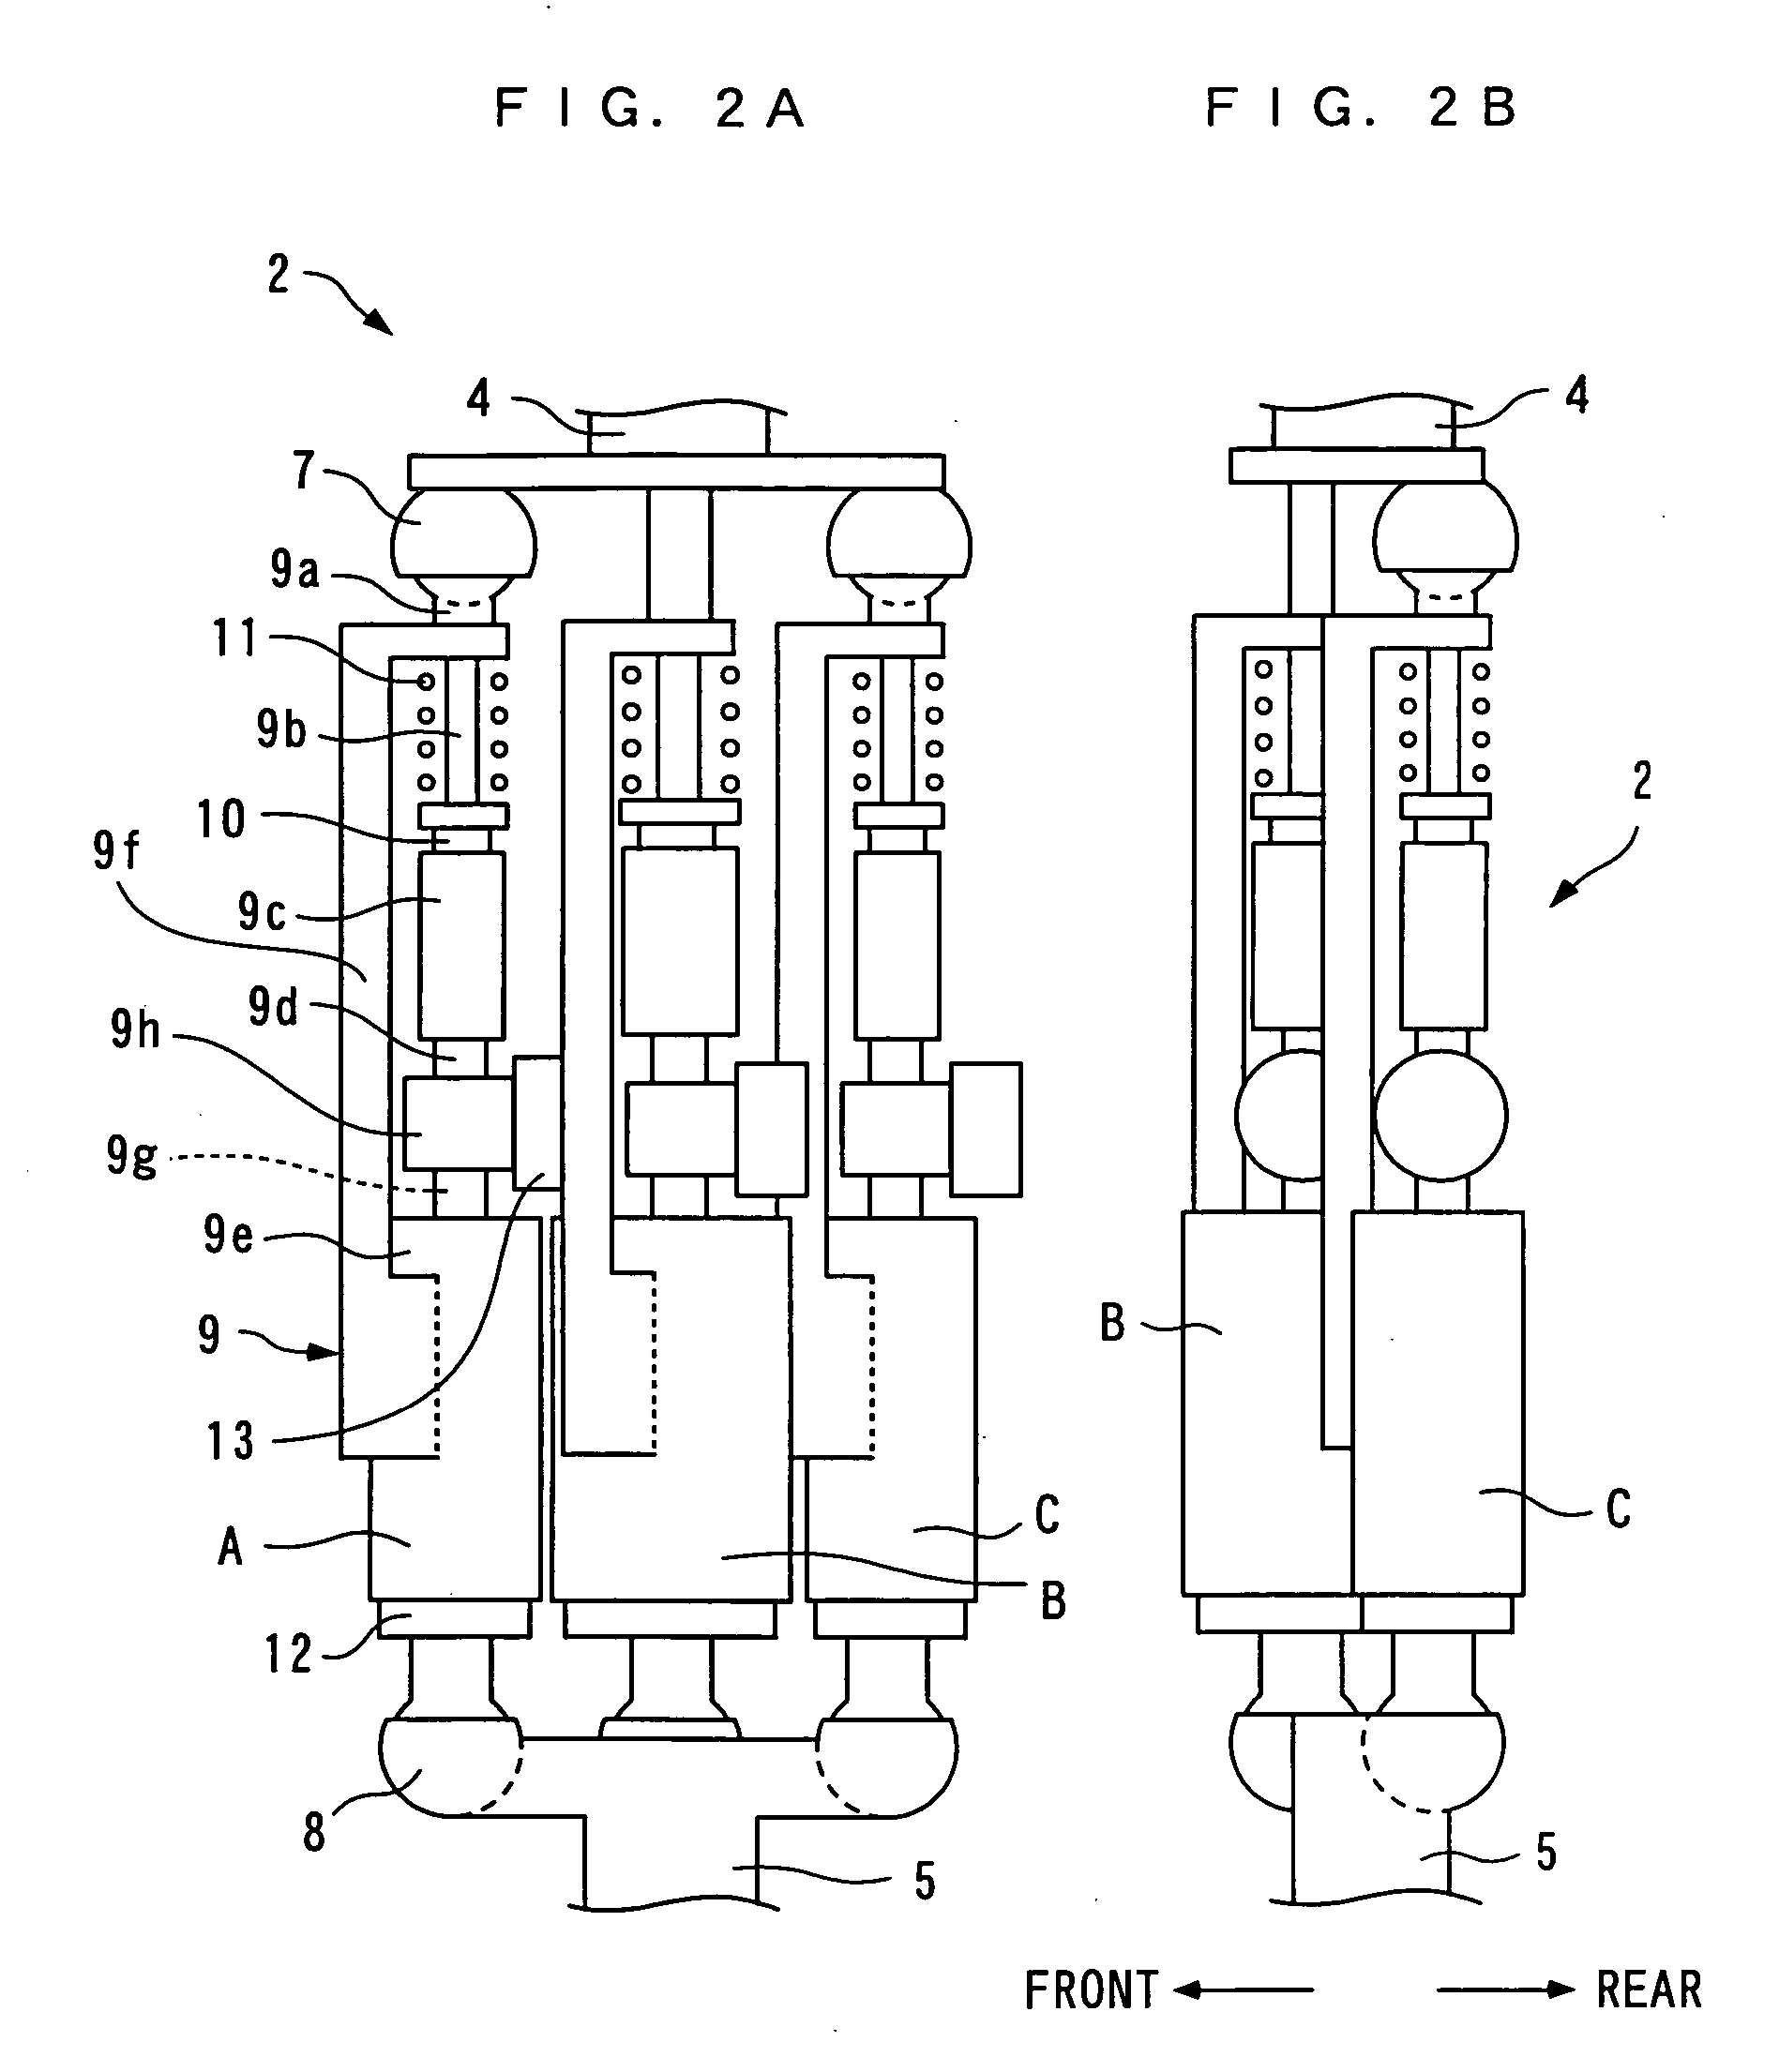 Joint device for artificial leg, method and control unit for controlling the joint device